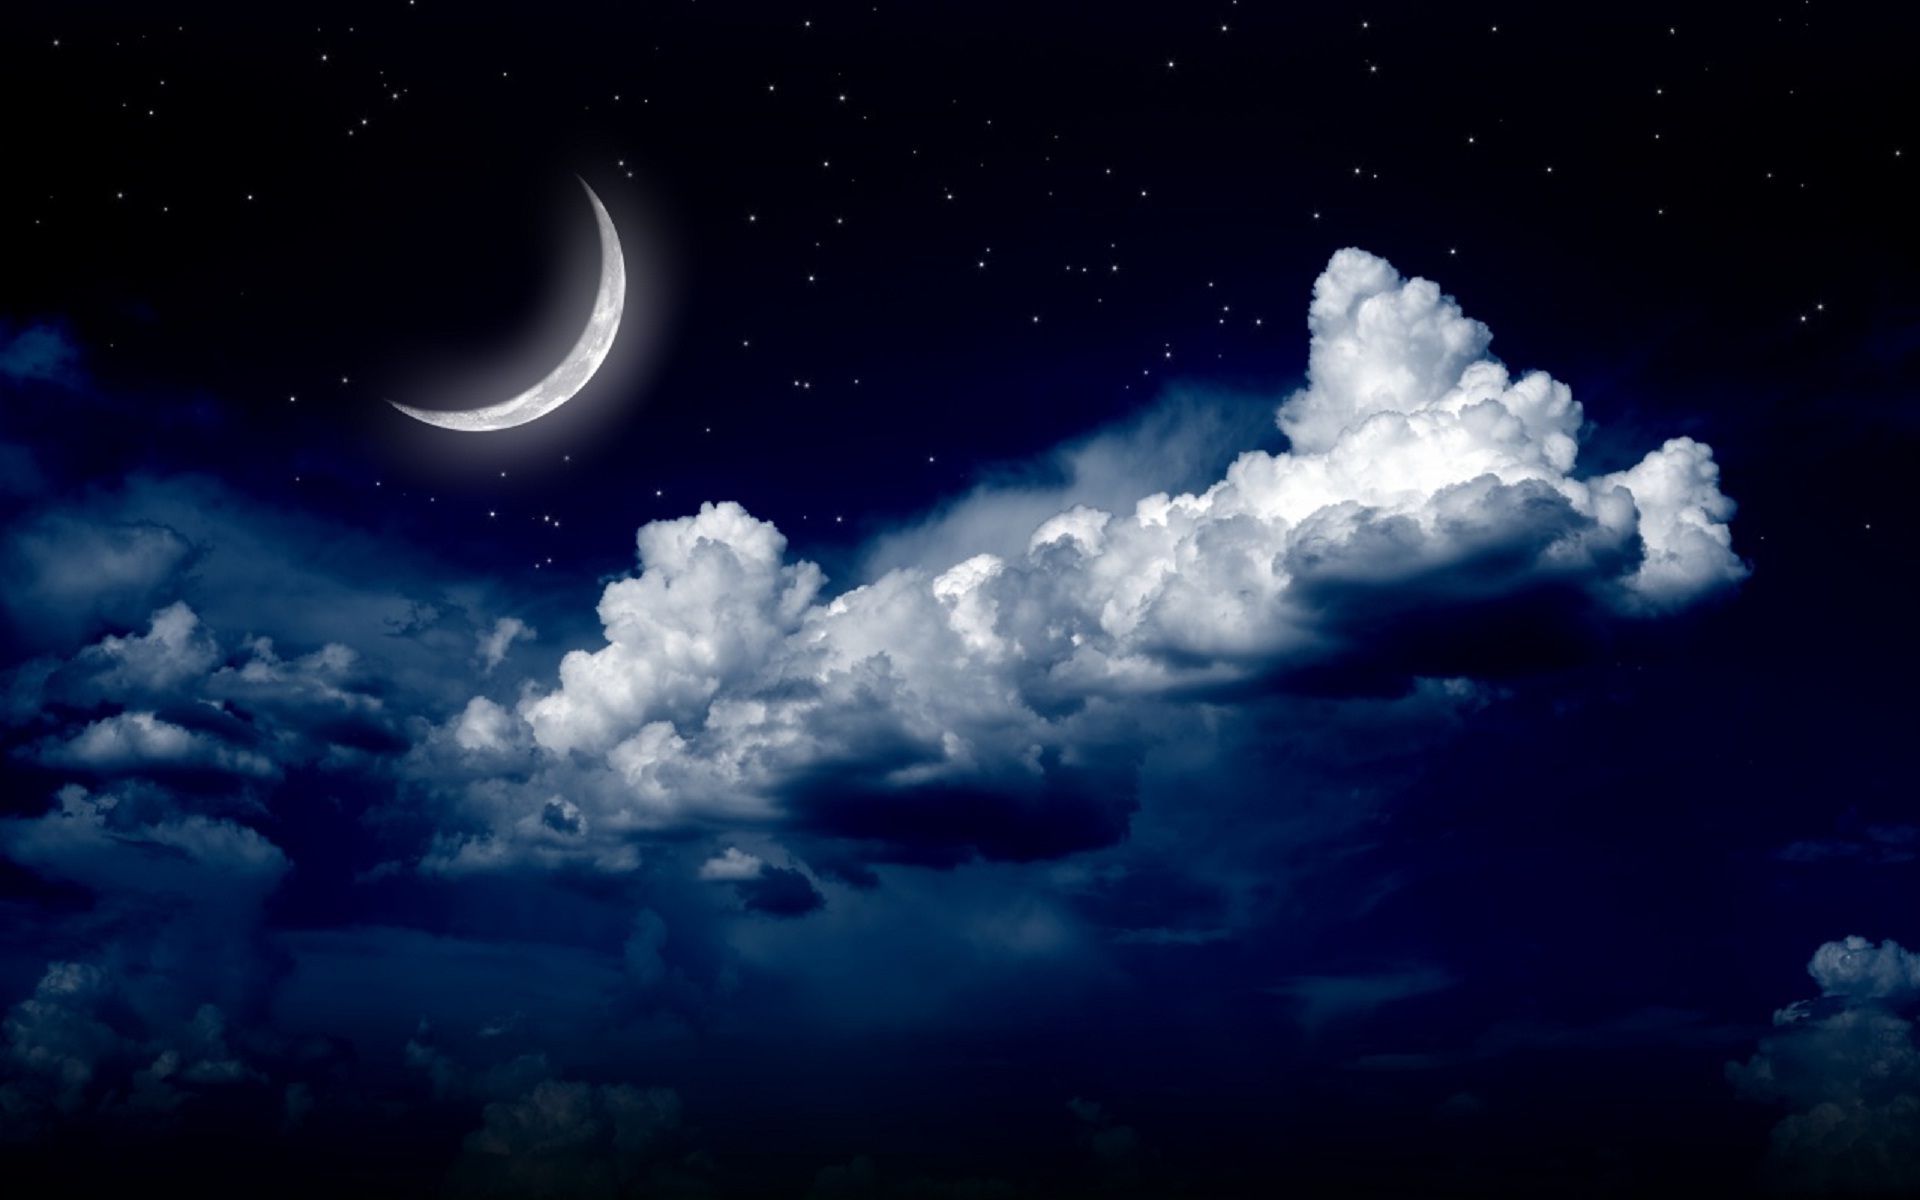 Fantasy Night Moon Clouds - Sky At Night Time - 1050x700 Wallpaper -  